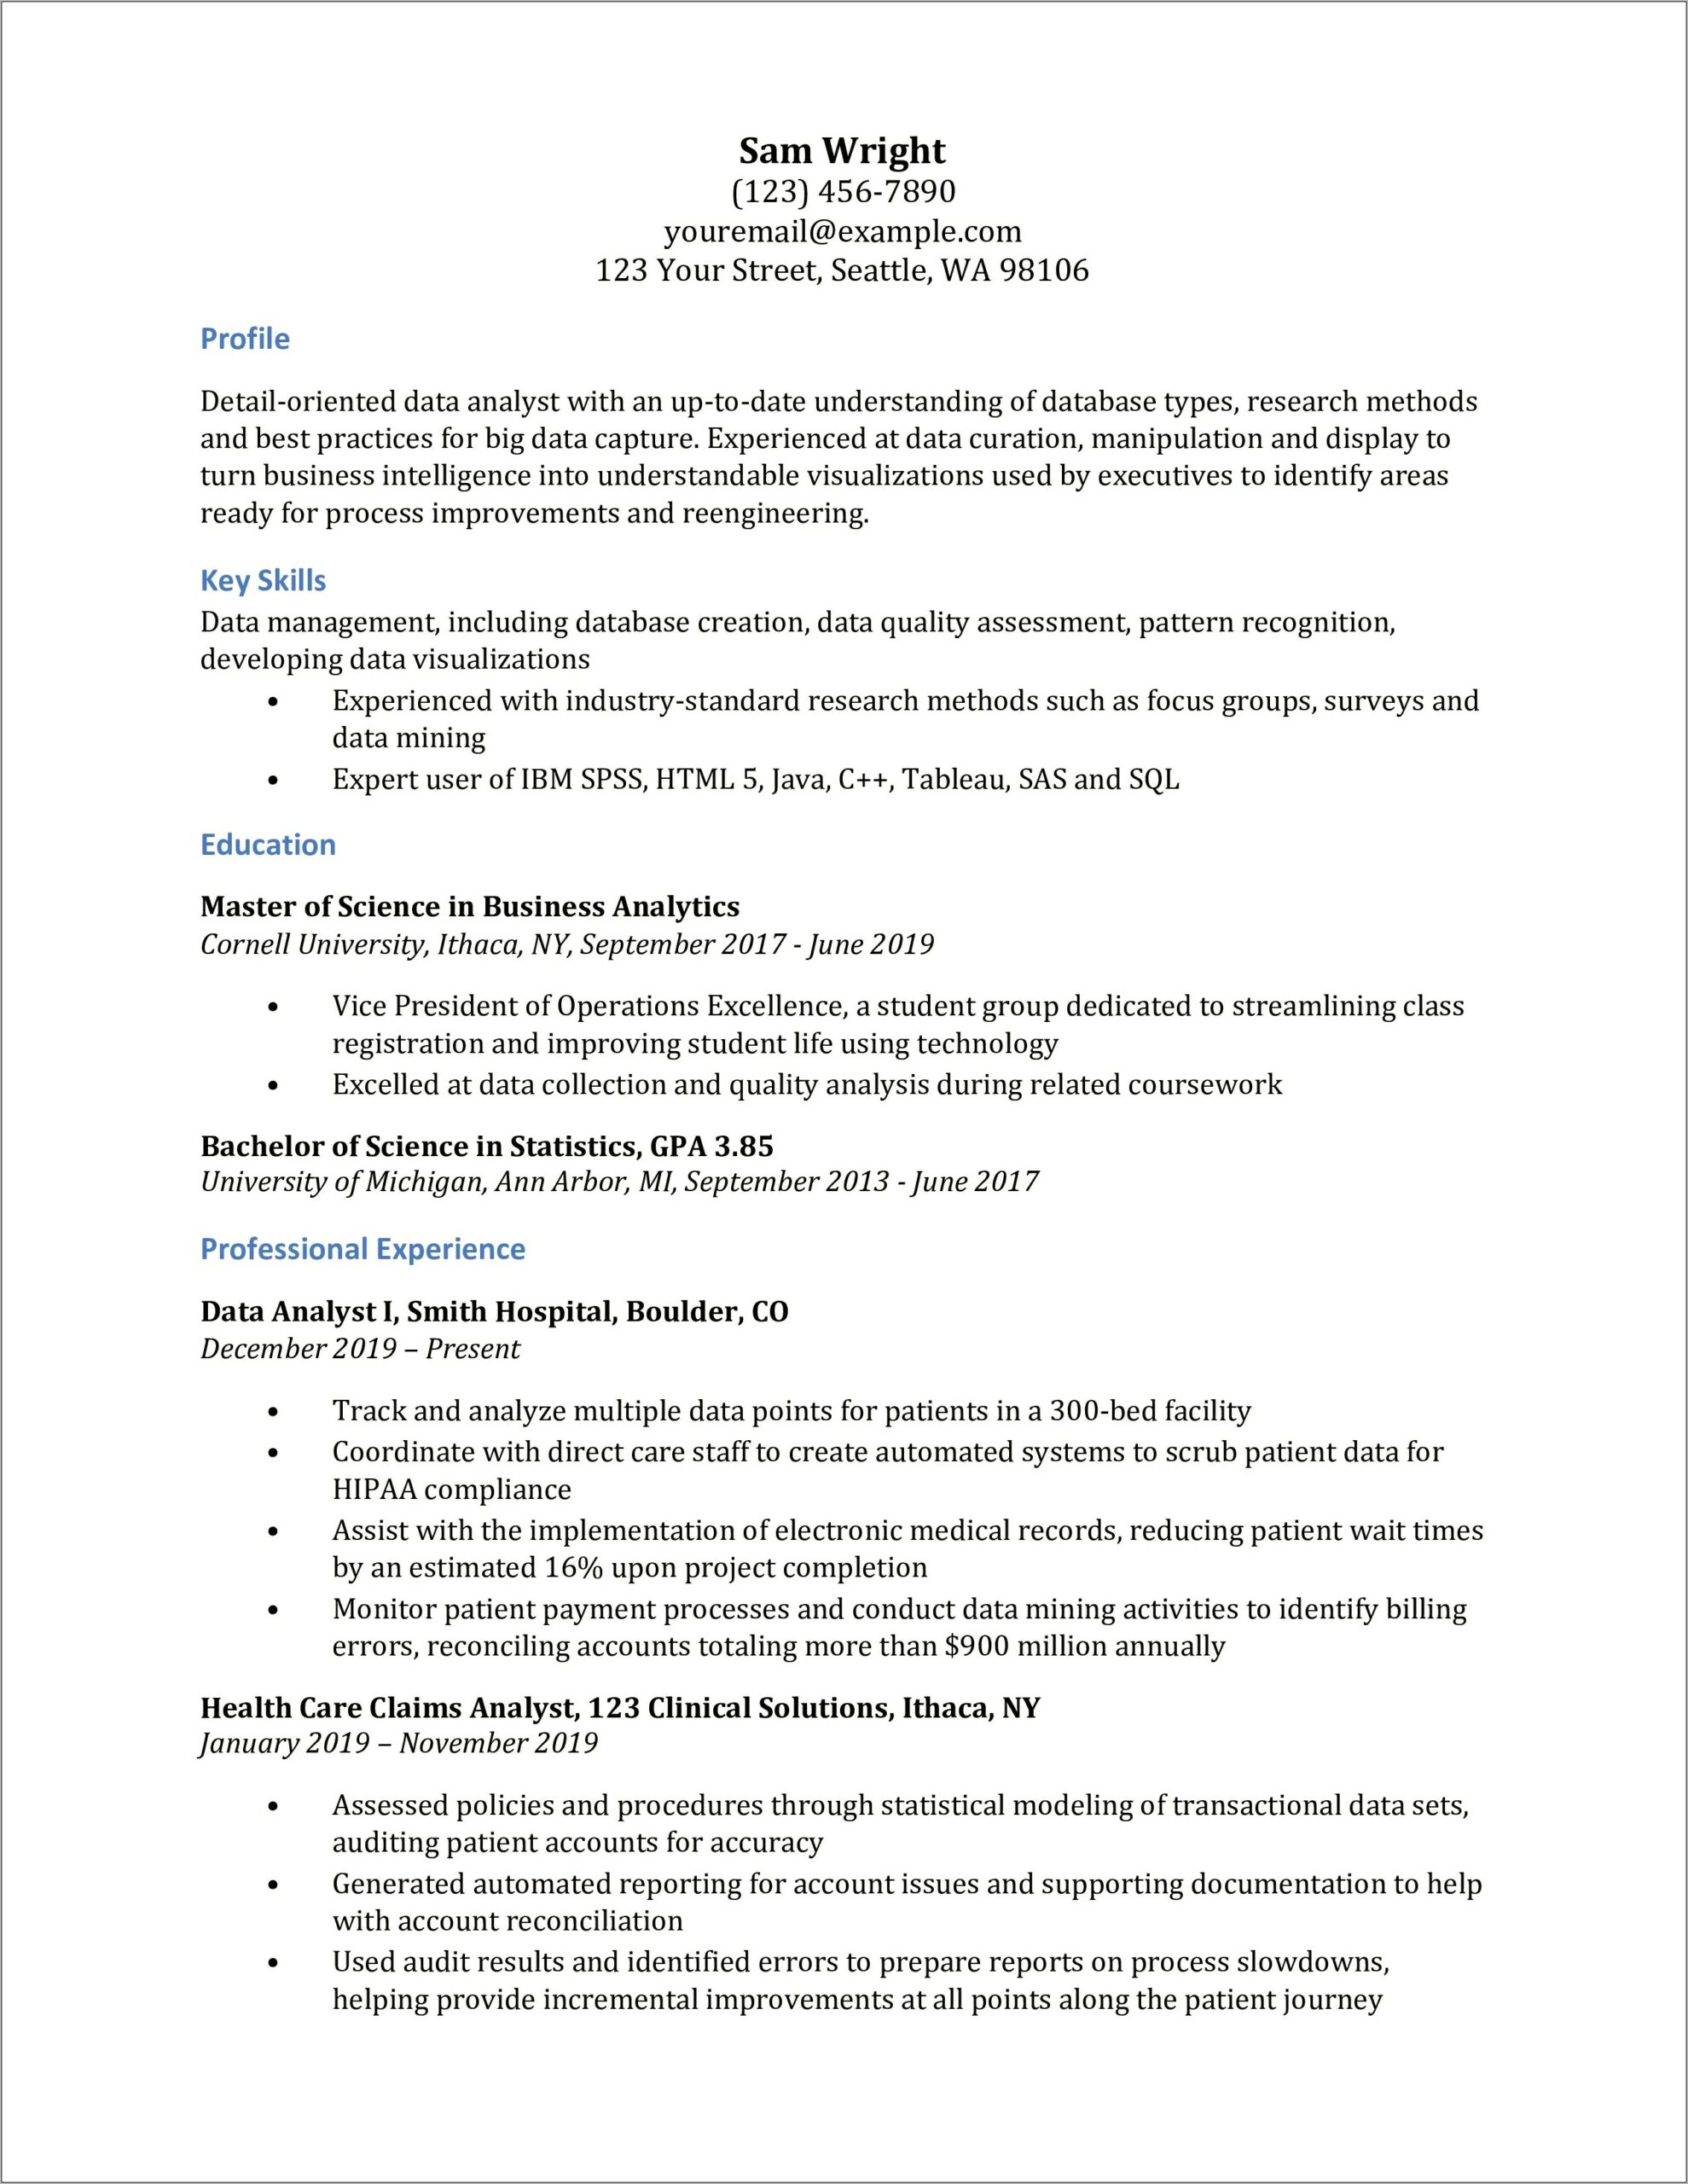 Business Analyst Resume With Emr And Ehr Experience